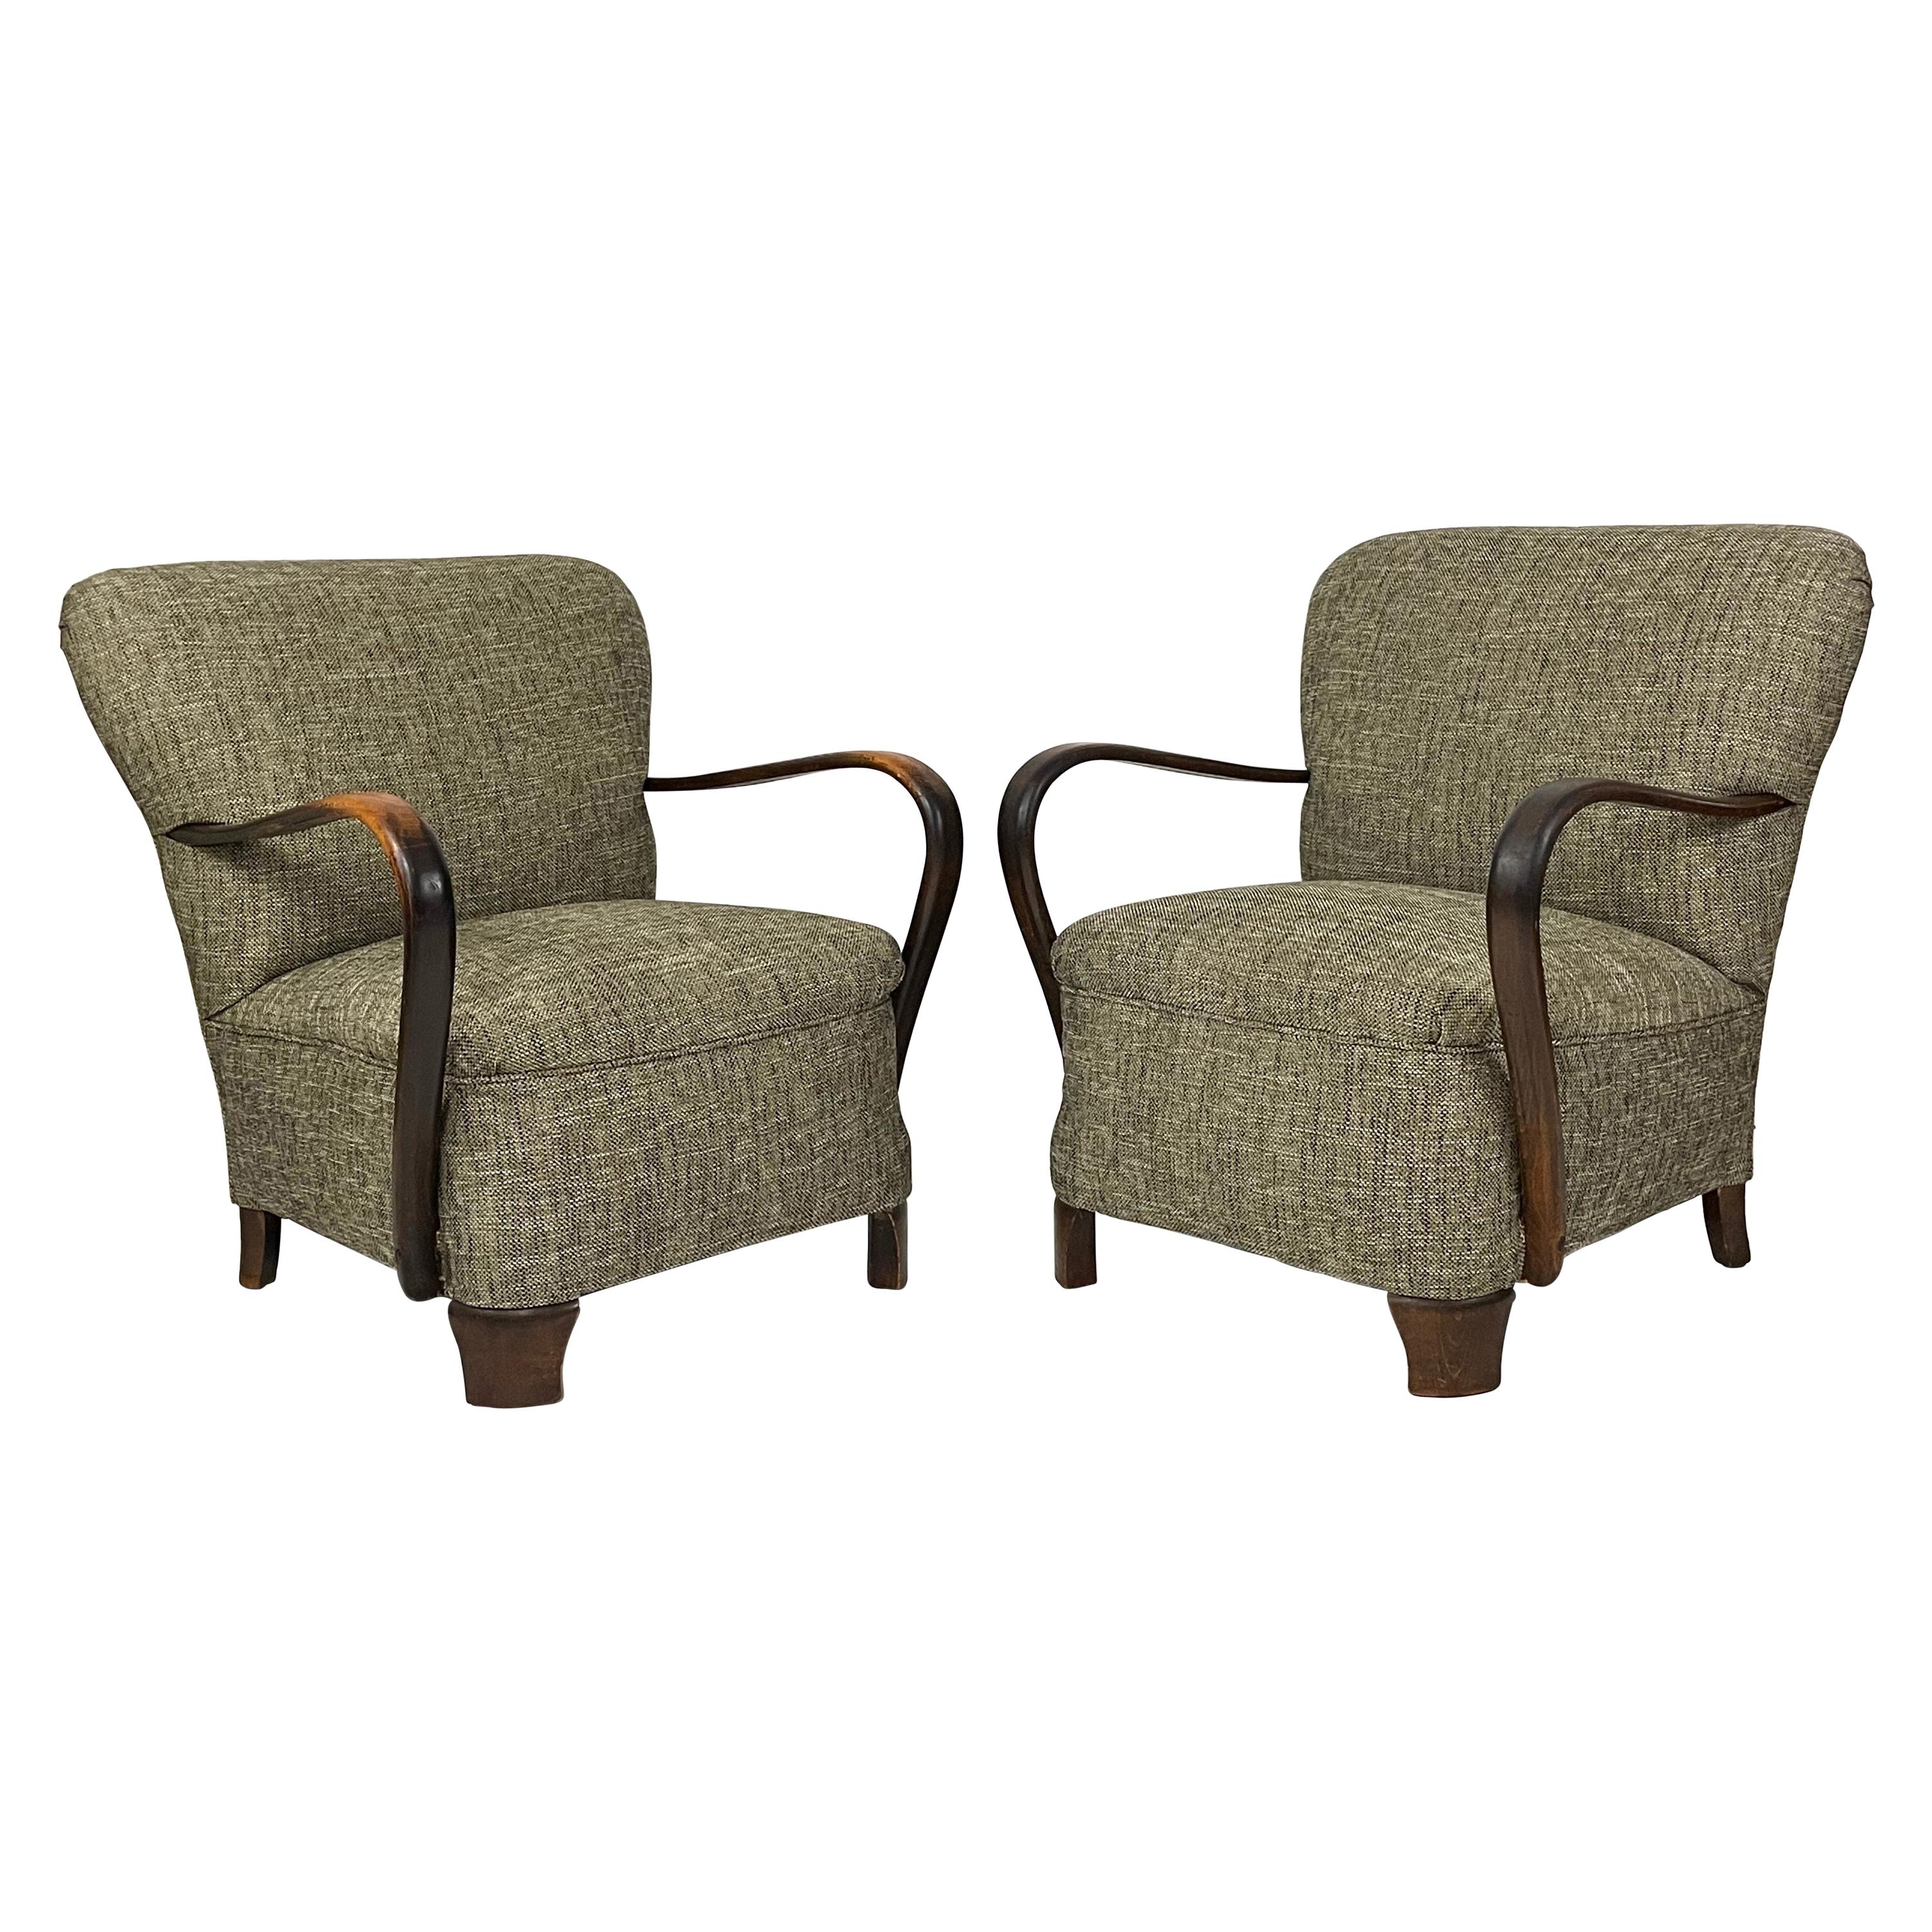 Pair of 1940s Upholstered Bentwood Lounge Chairs